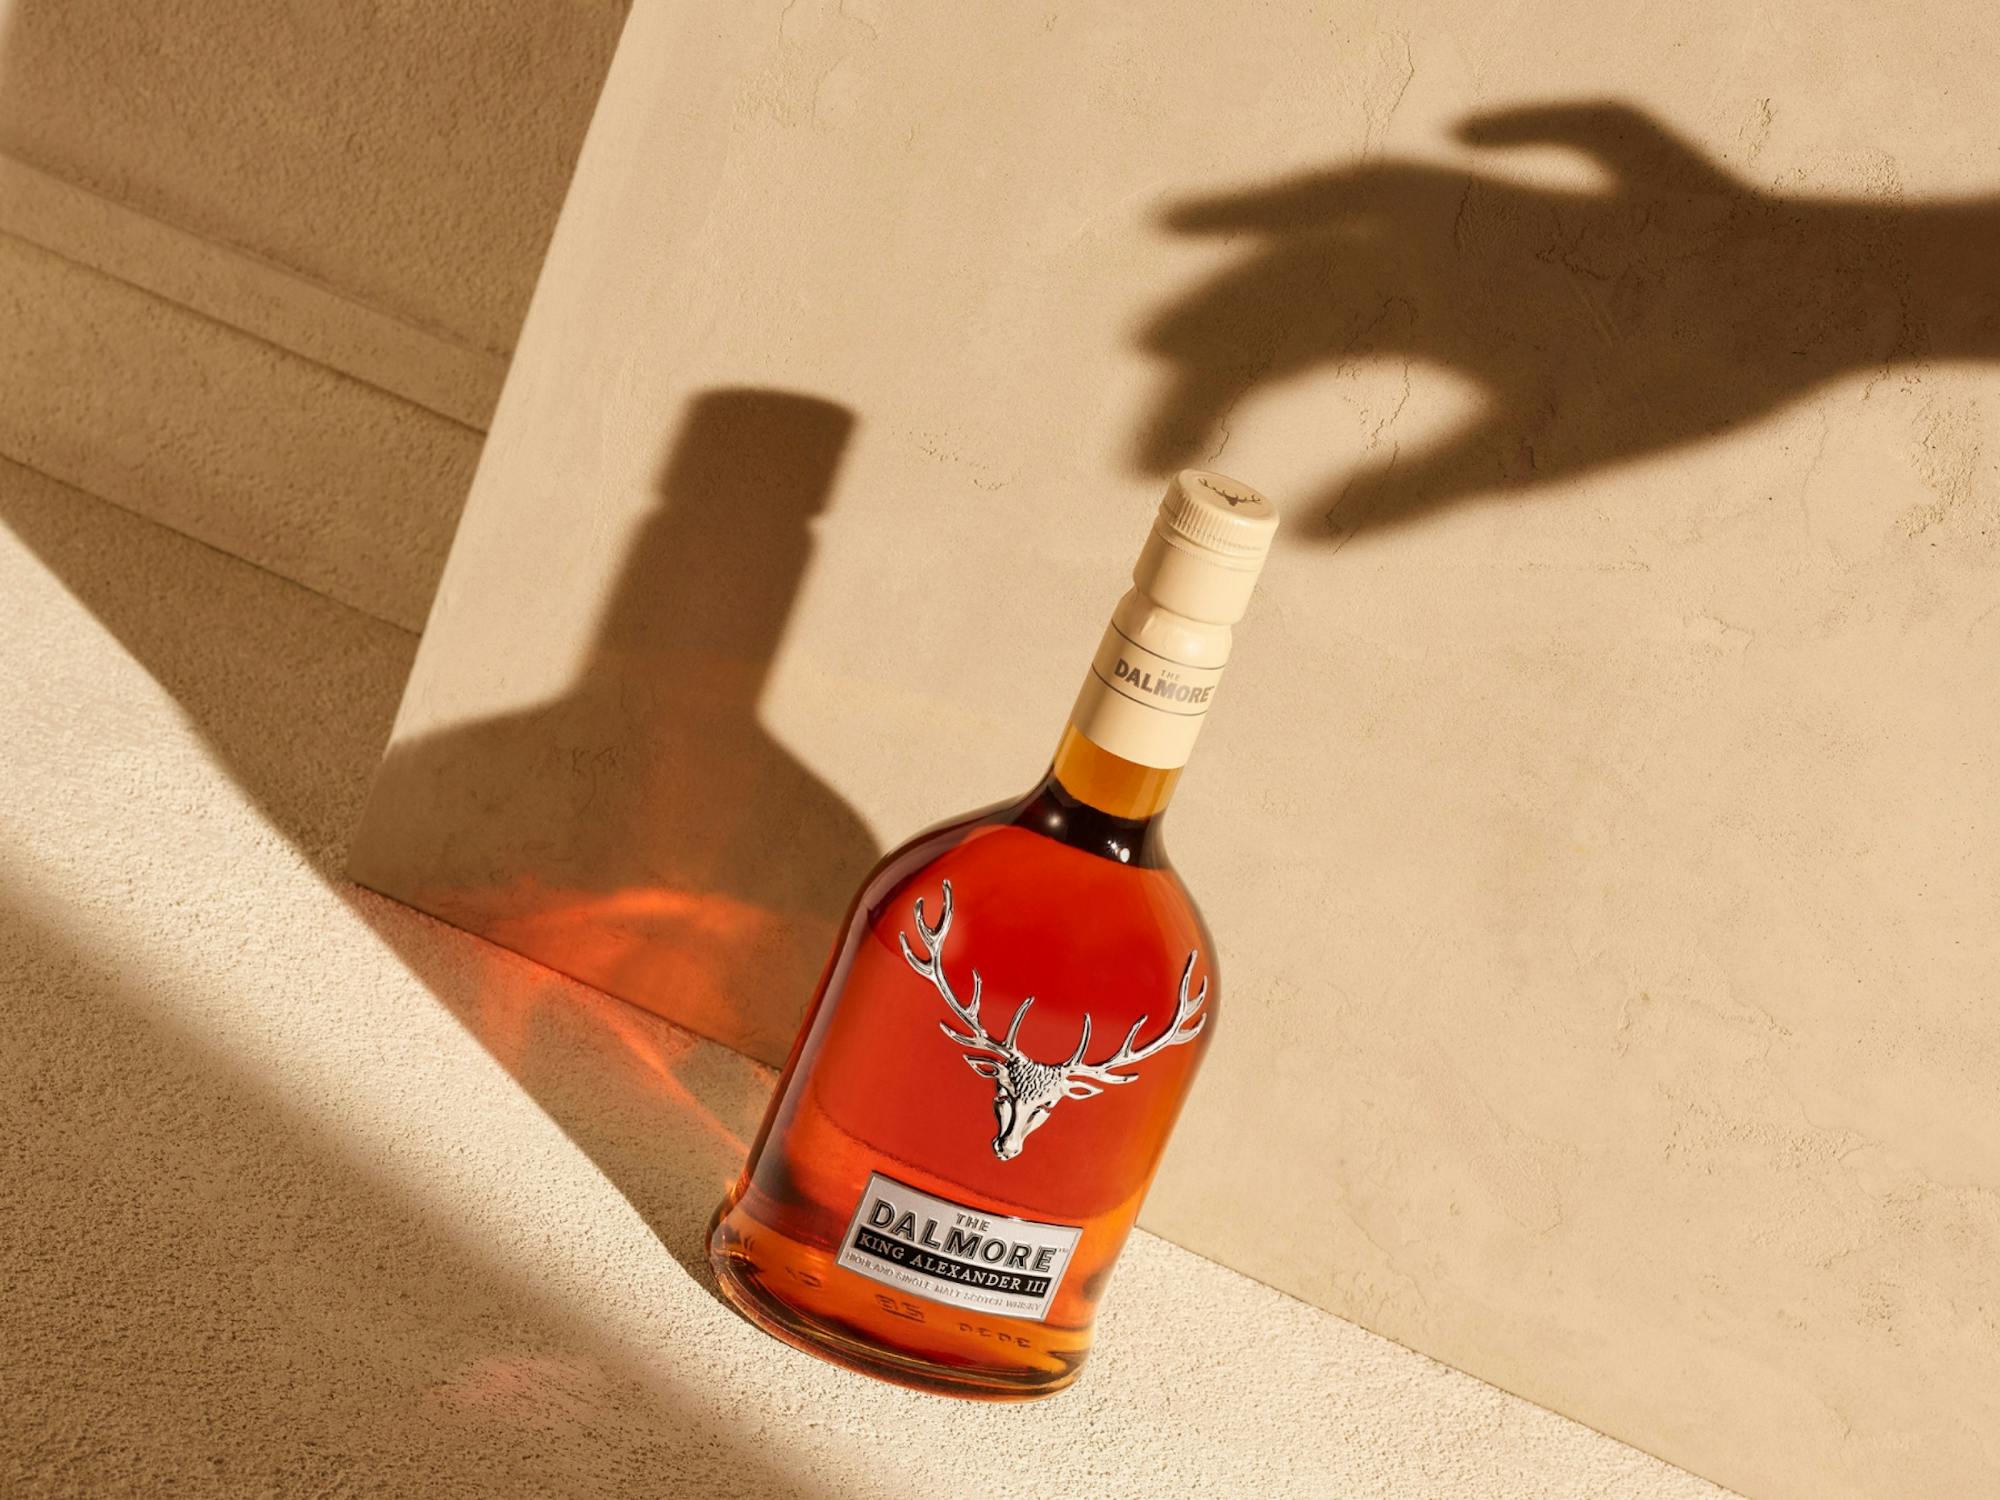 Welcome to Walpole Introducing The Dalmore, our latest Walpole member 